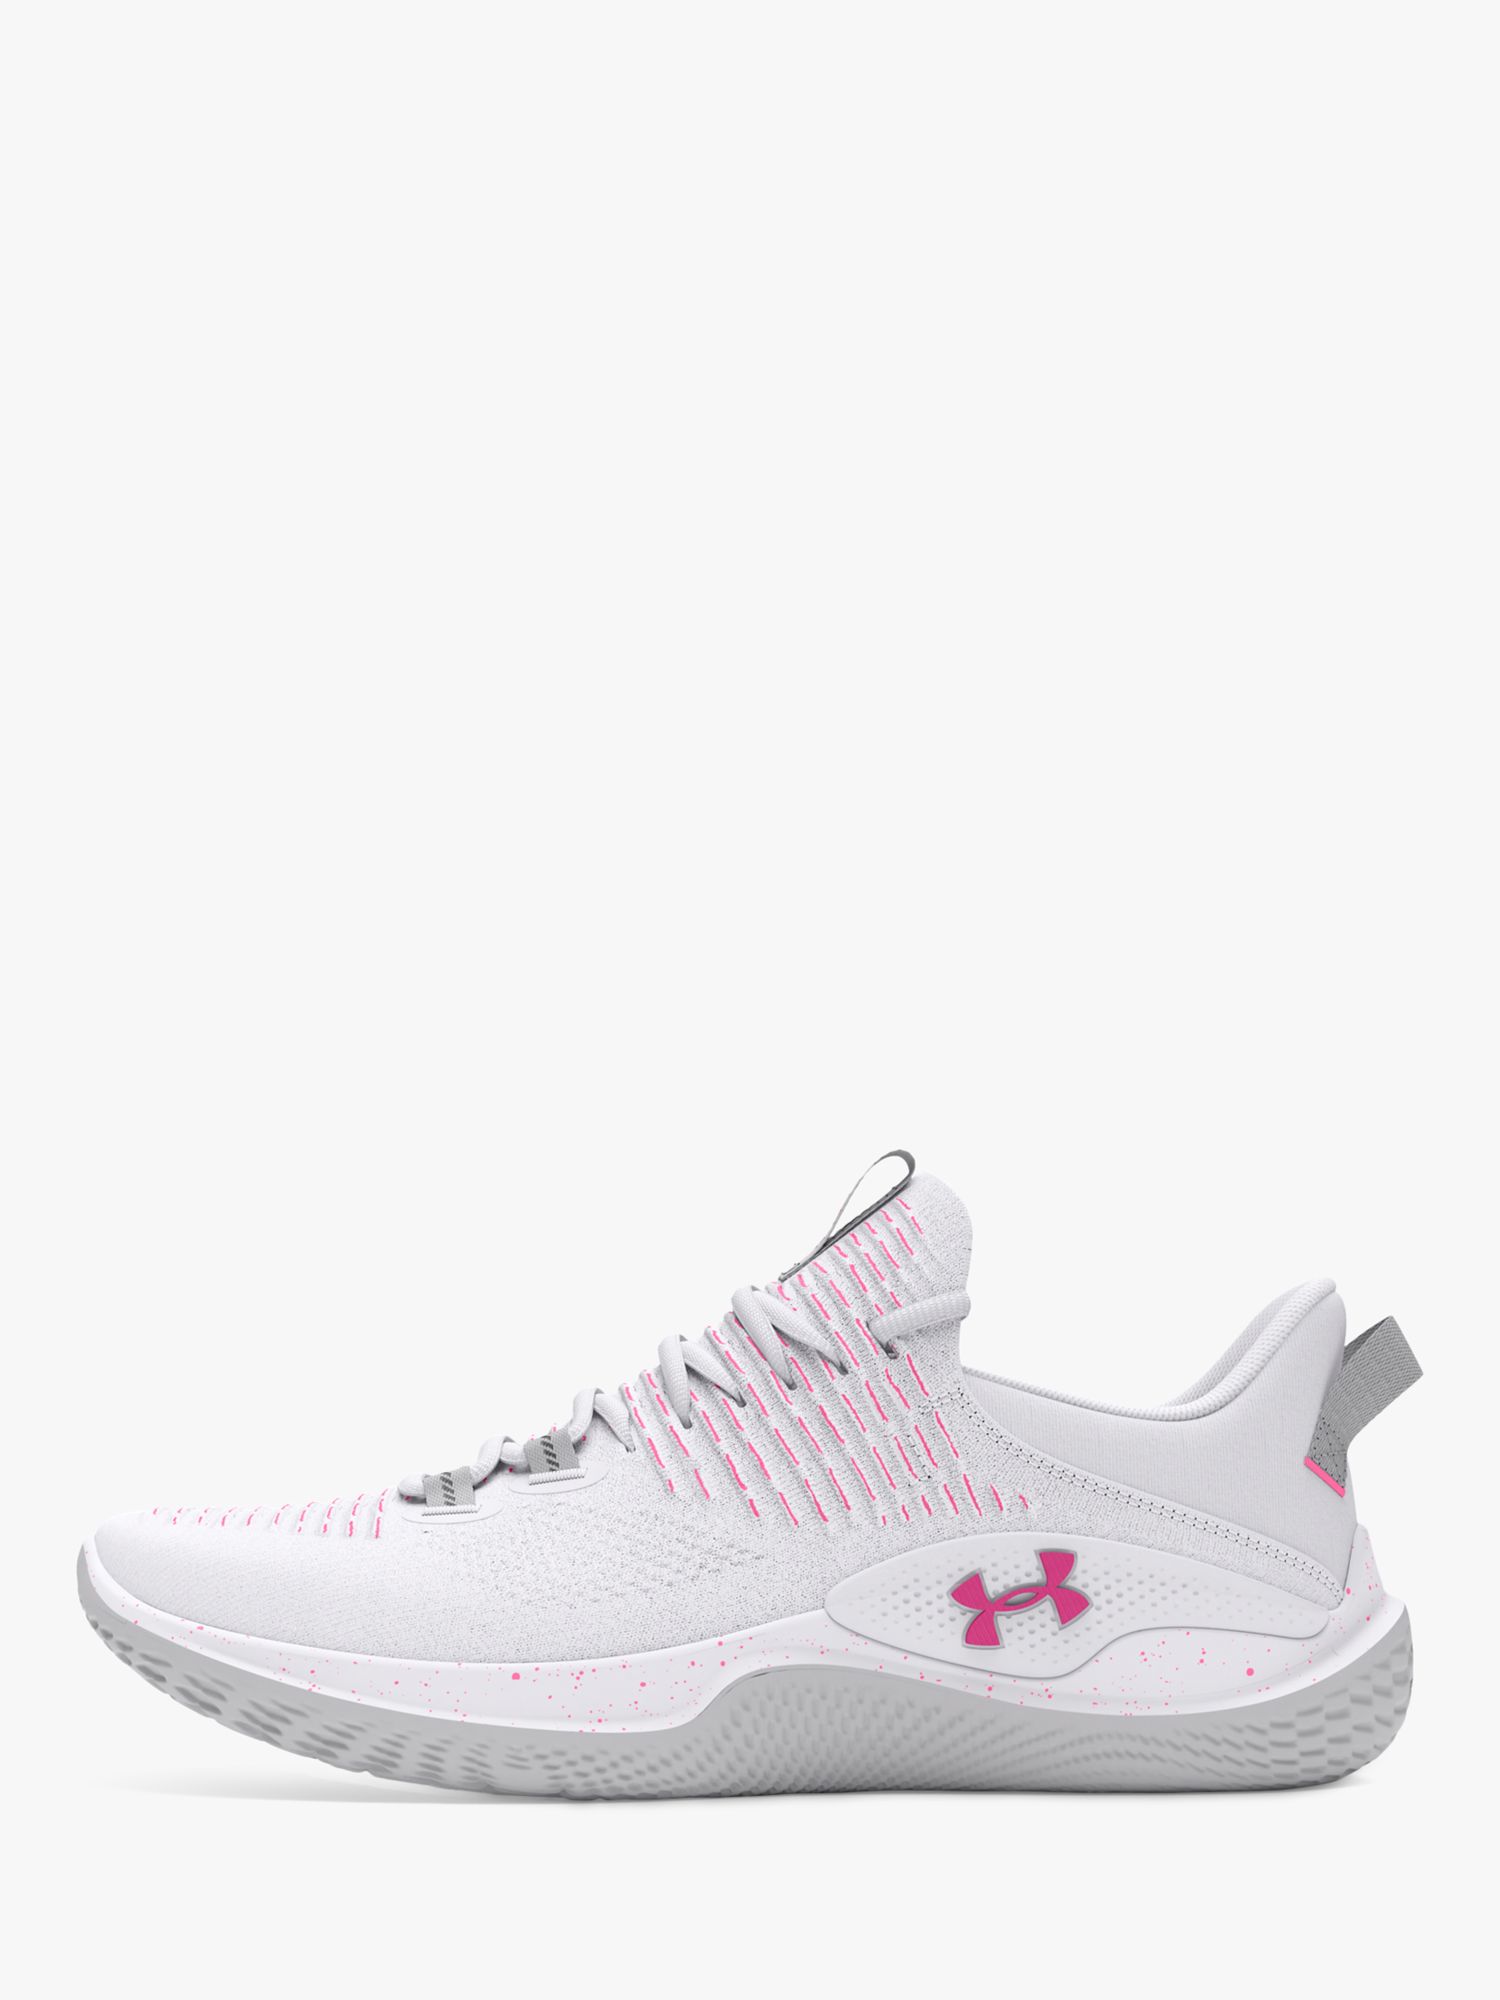 Buy Under Armour Flow Dynamic Women's Training Shoes Online at johnlewis.com